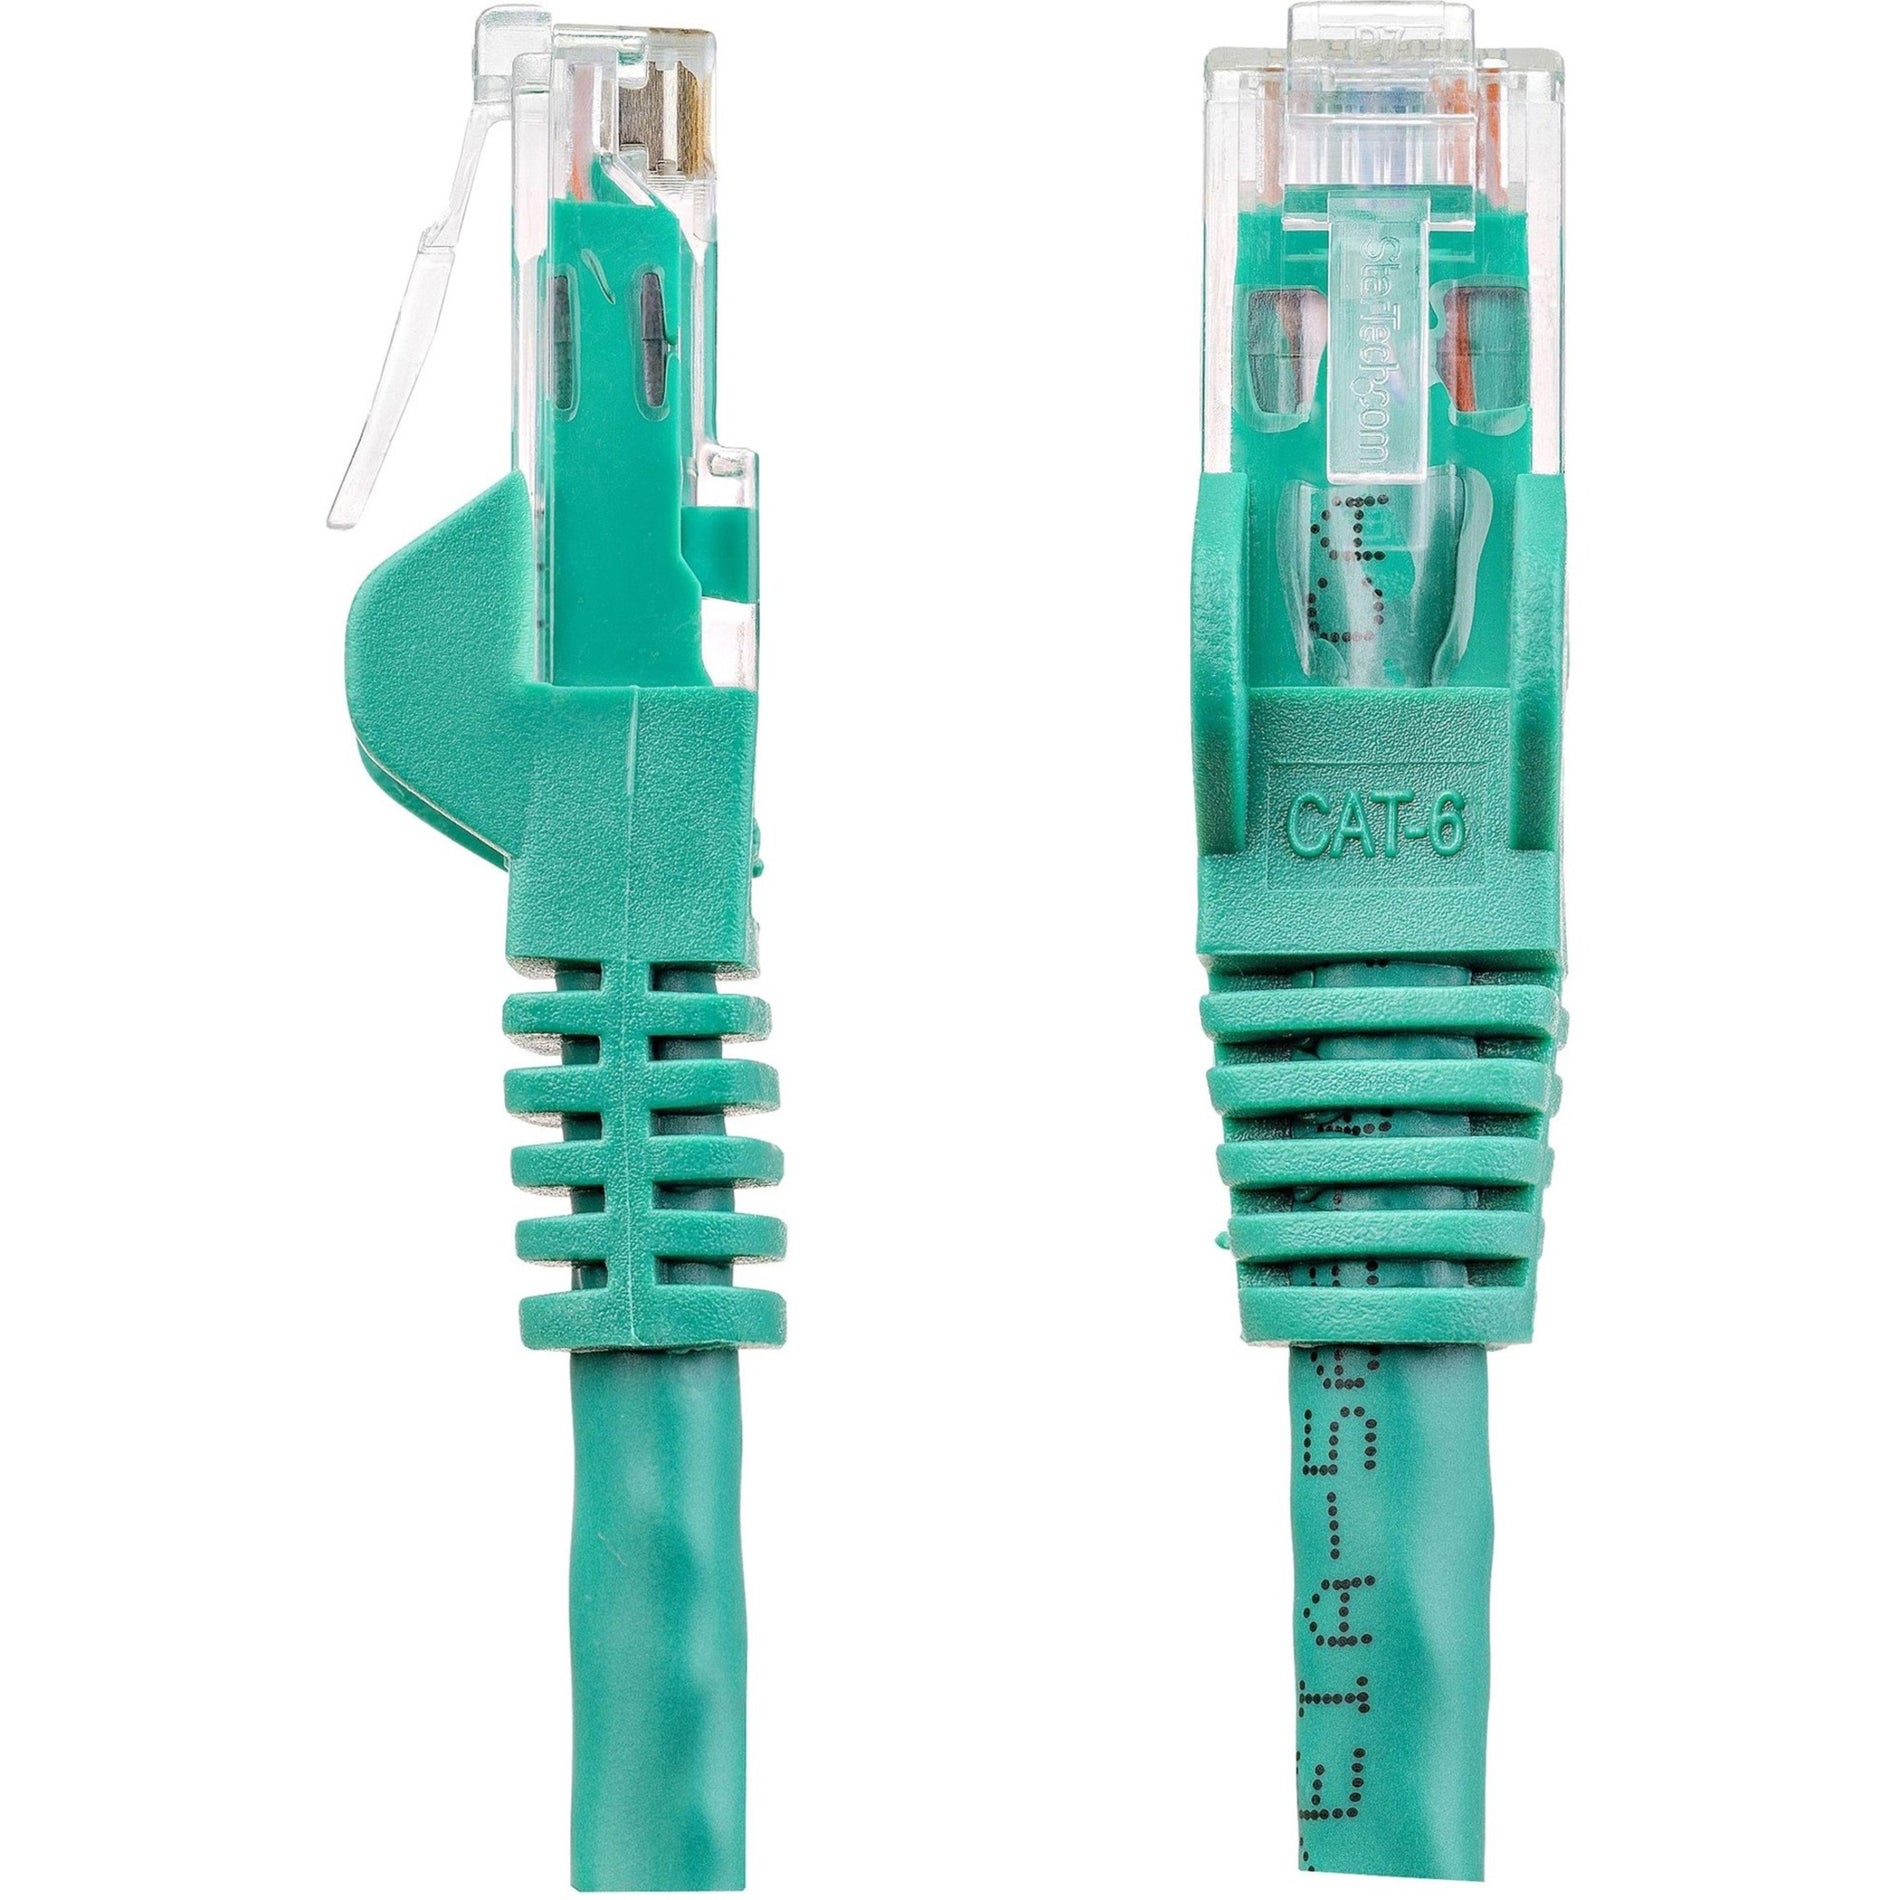 StarTech.com N6PATCH35GN 35 ft Green Snagless Cat6 UTP Patch Cable, Lifetime Warranty, 10 Gbit/s Data Transfer Rate